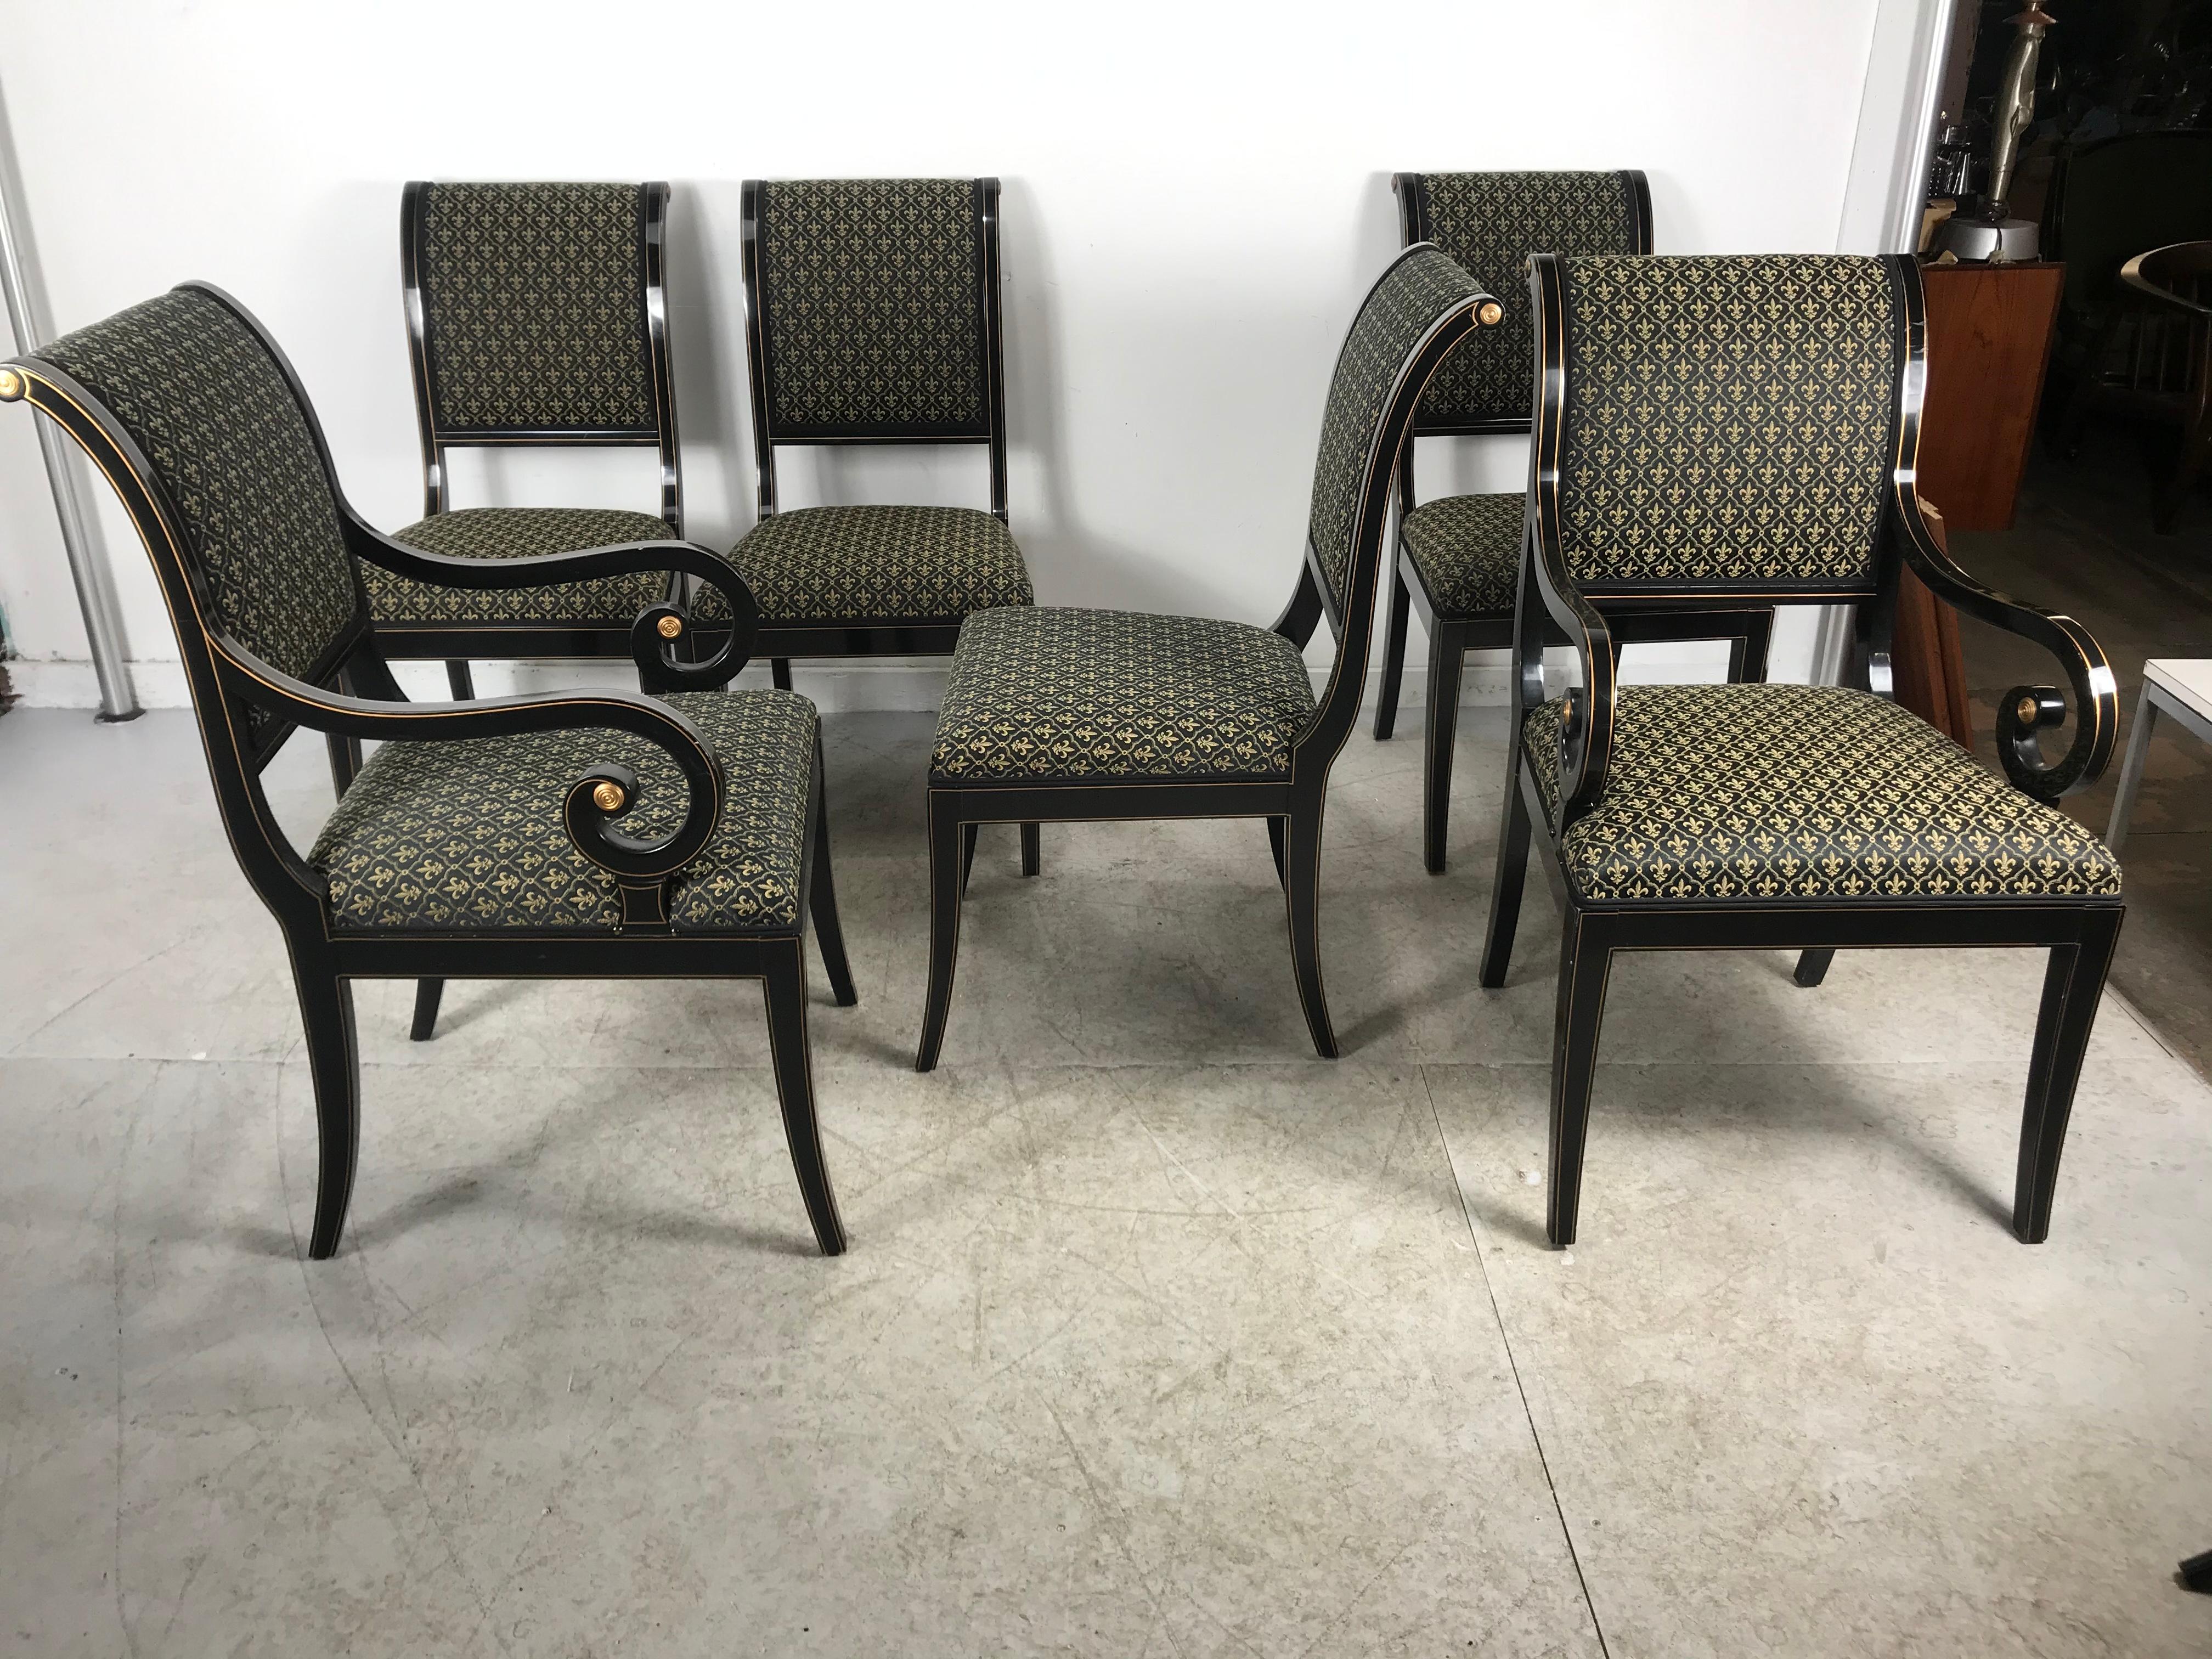 Hollywood Regency Set 6 Black Lacquer and Gold Regency Modern Dining Chairs